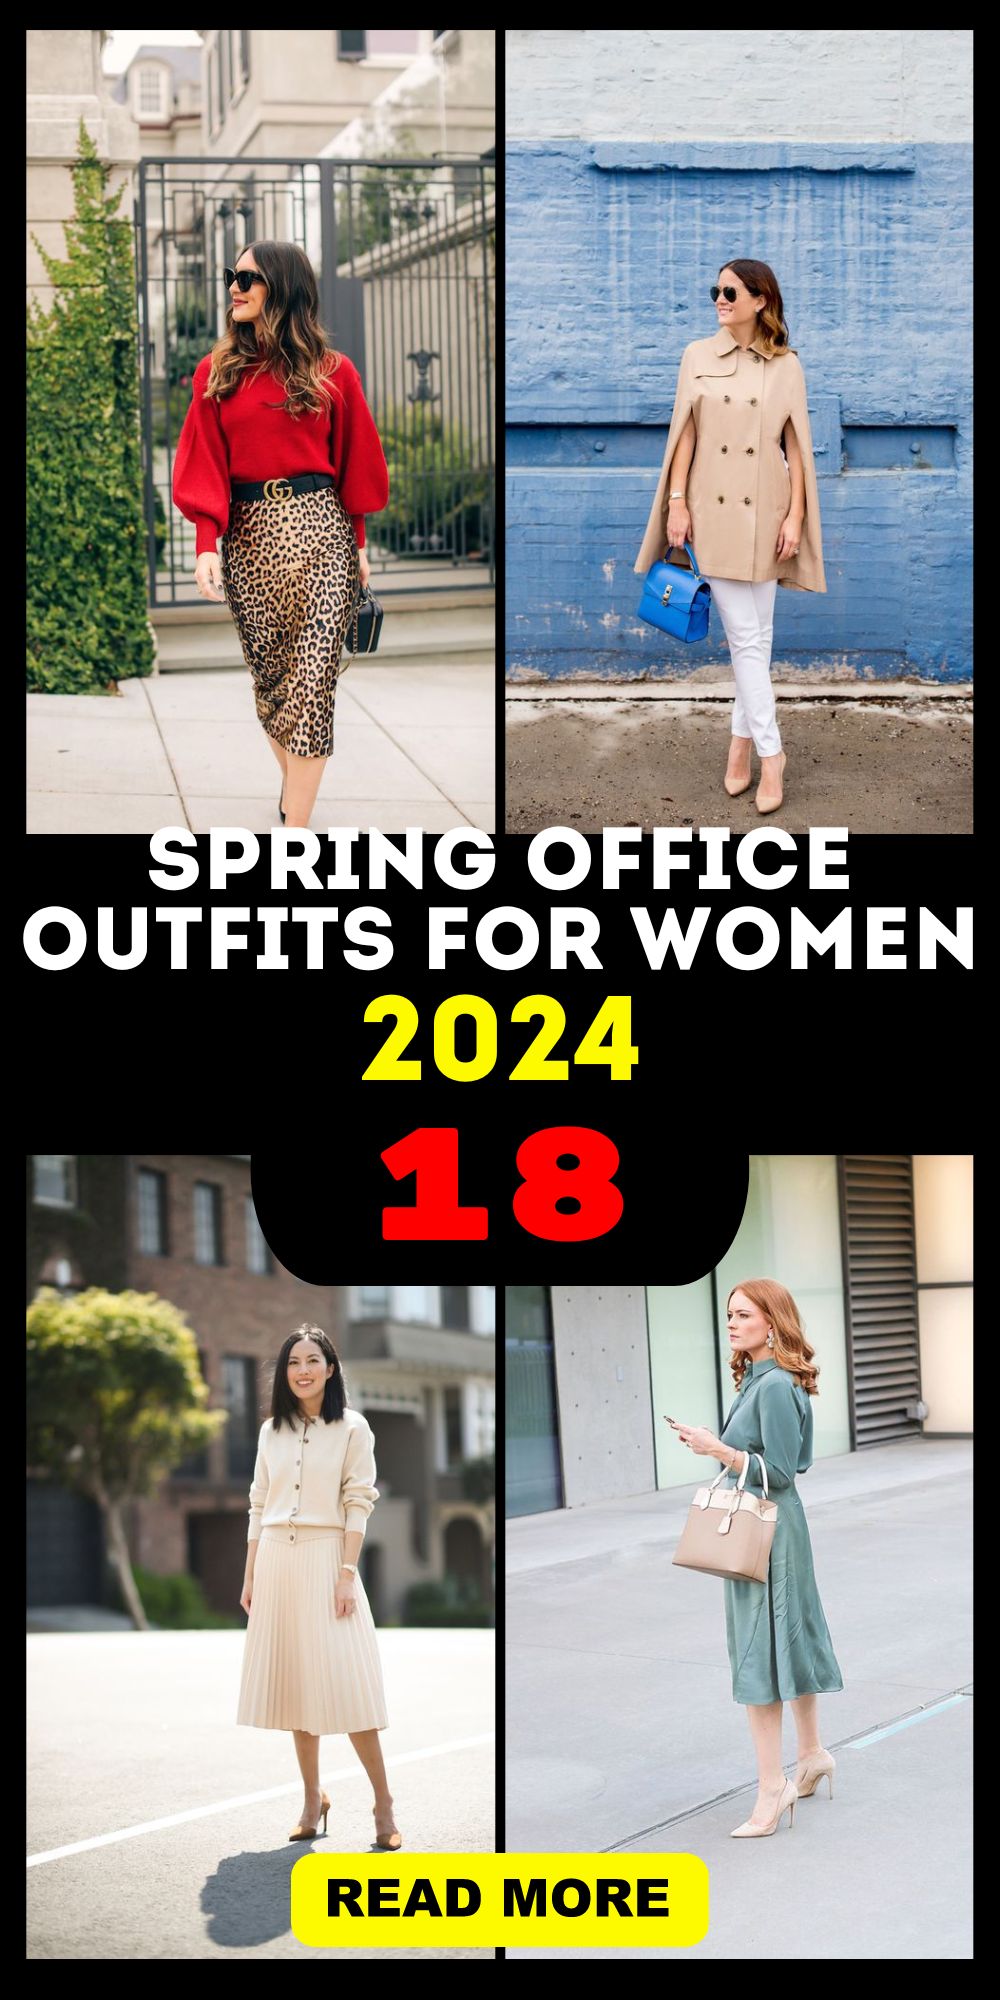 Spring Office Outfits for Women 2024 - Classy & Professional Styles